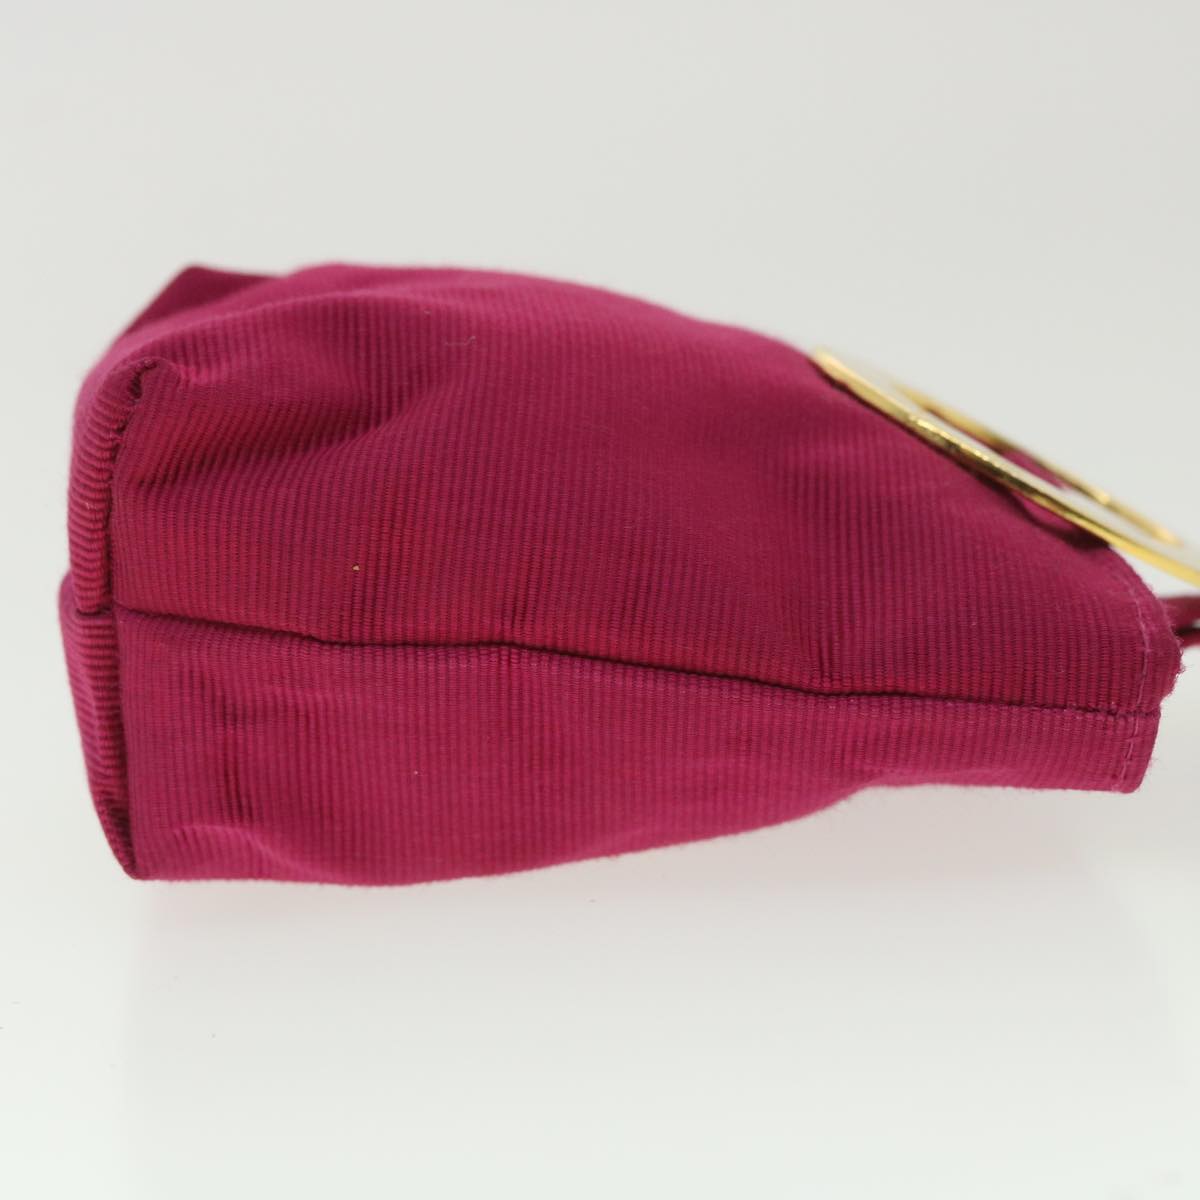 CELINE Logo Pouch Nylon Red Pink Auth 36350